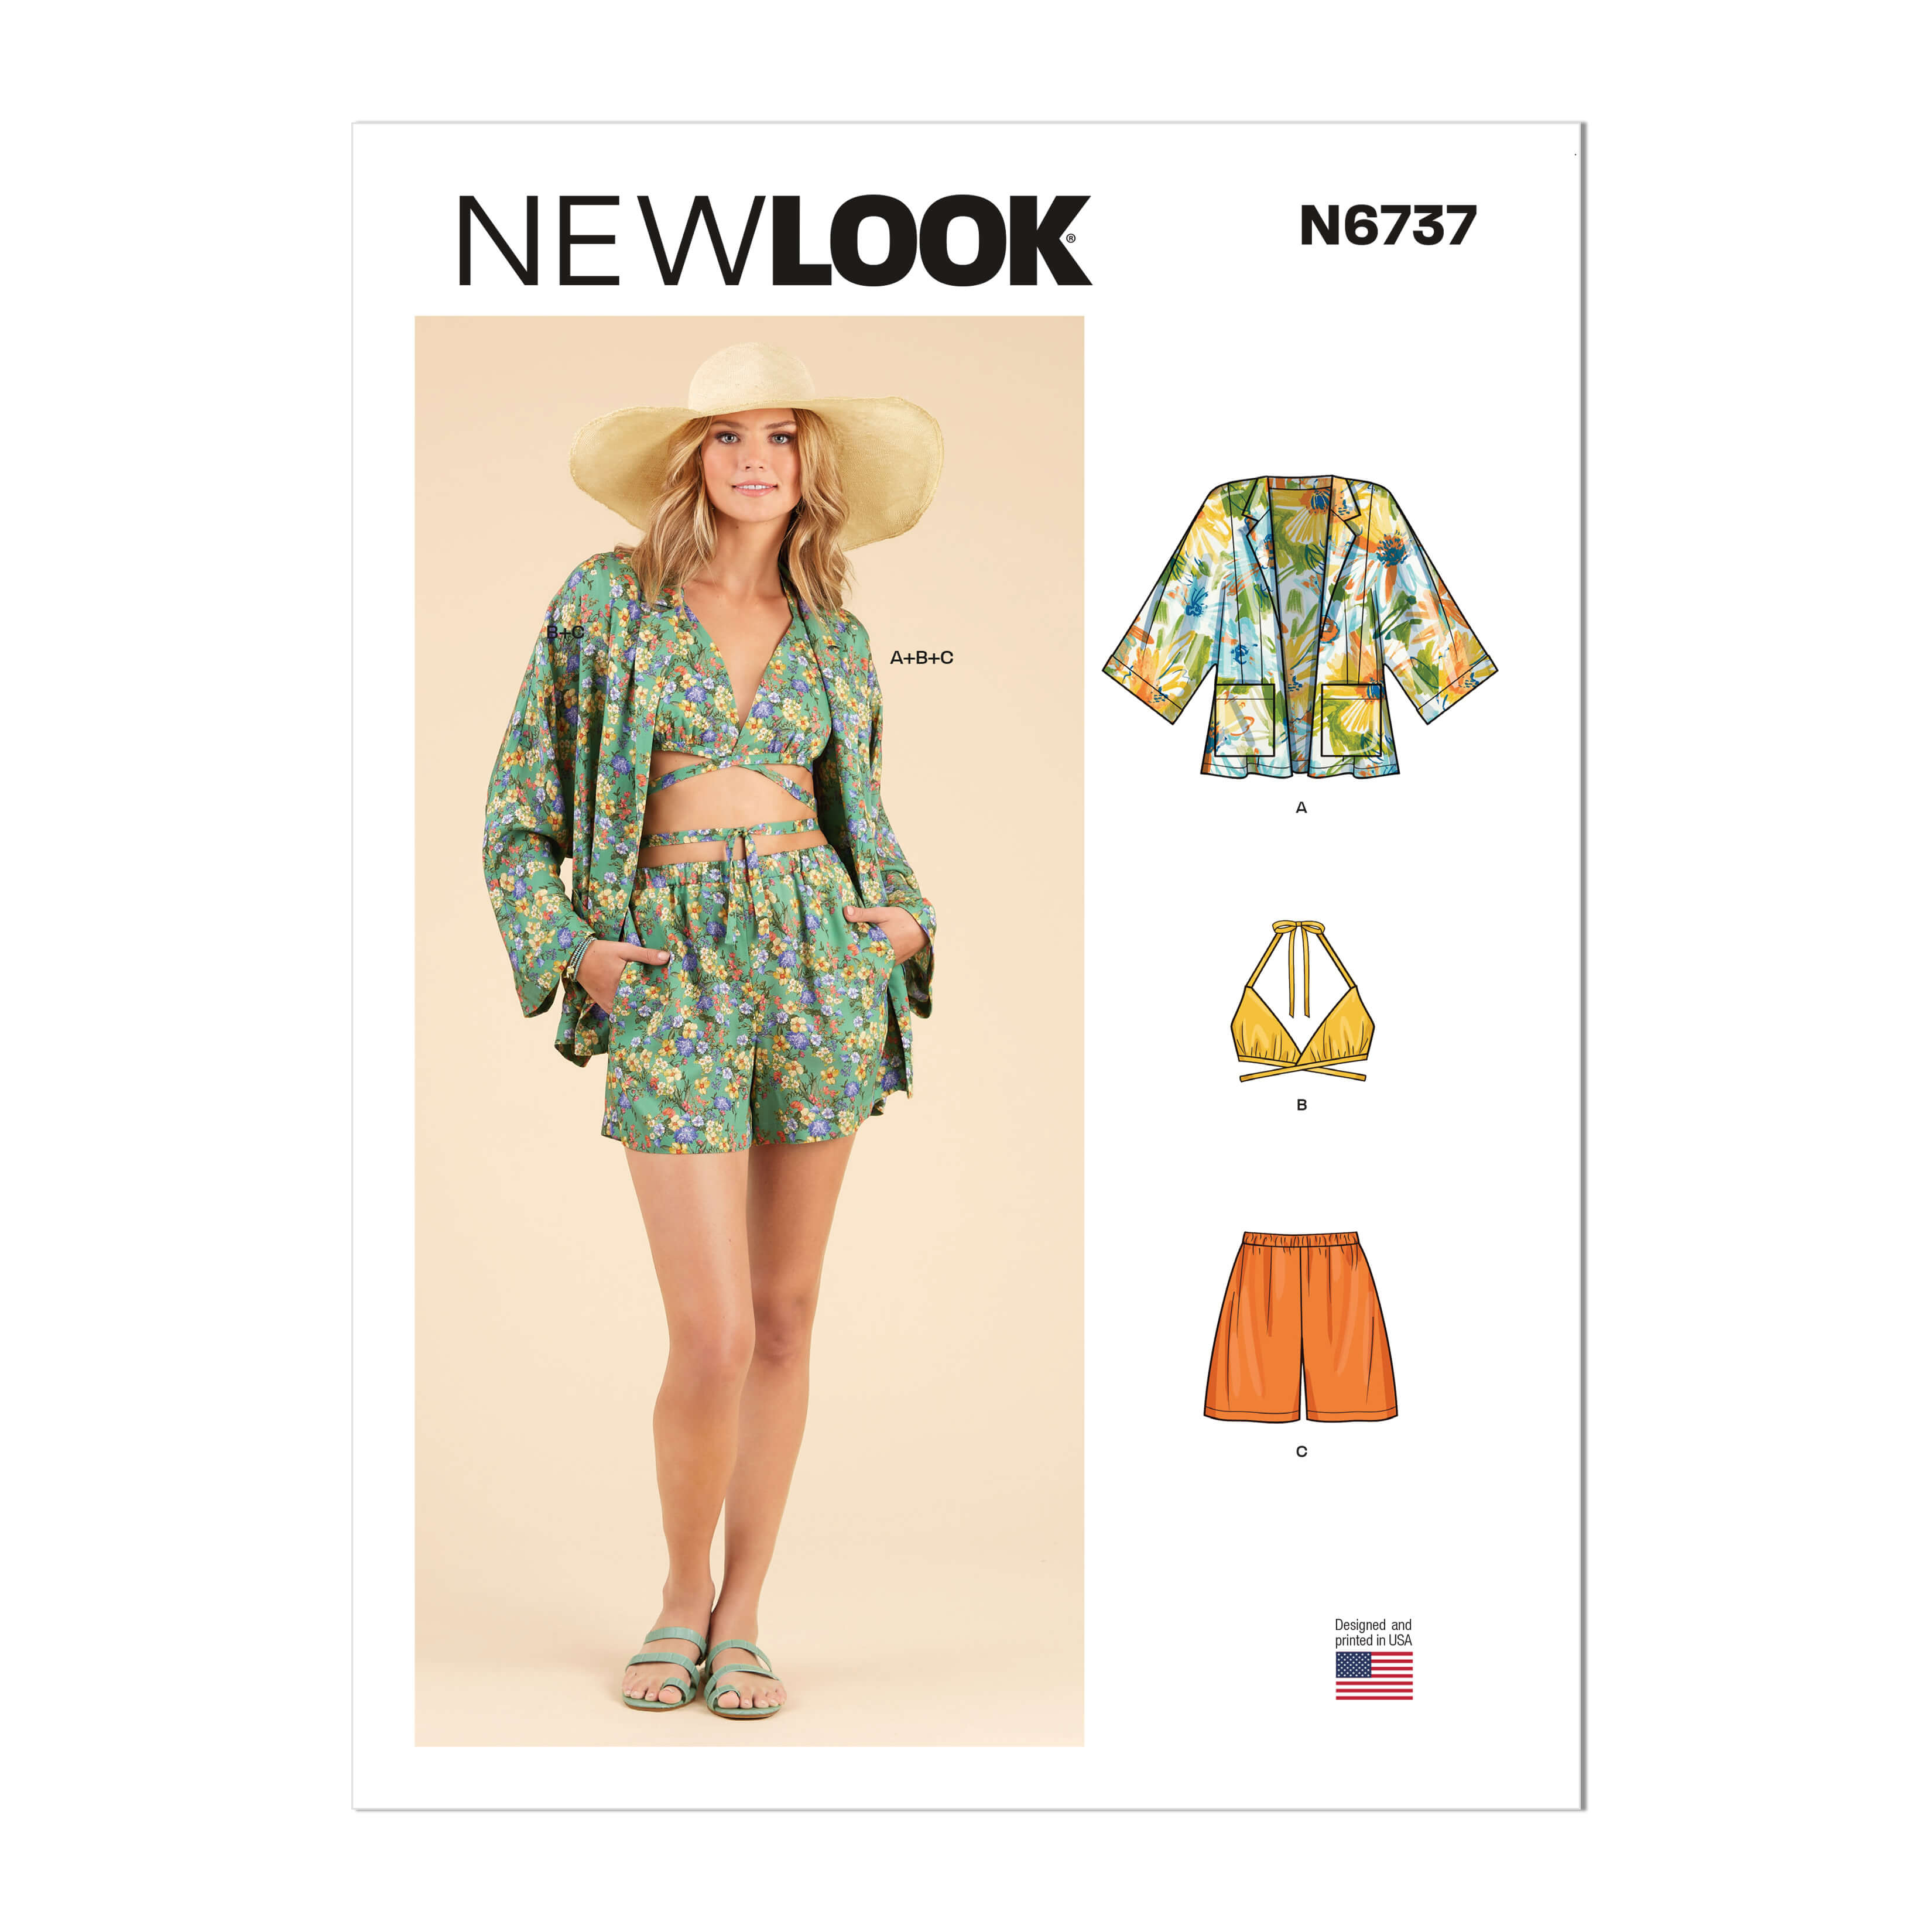 New Look Sewing Pattern N6737 Misses' Jacket, Wrap Halter Top and Shorts